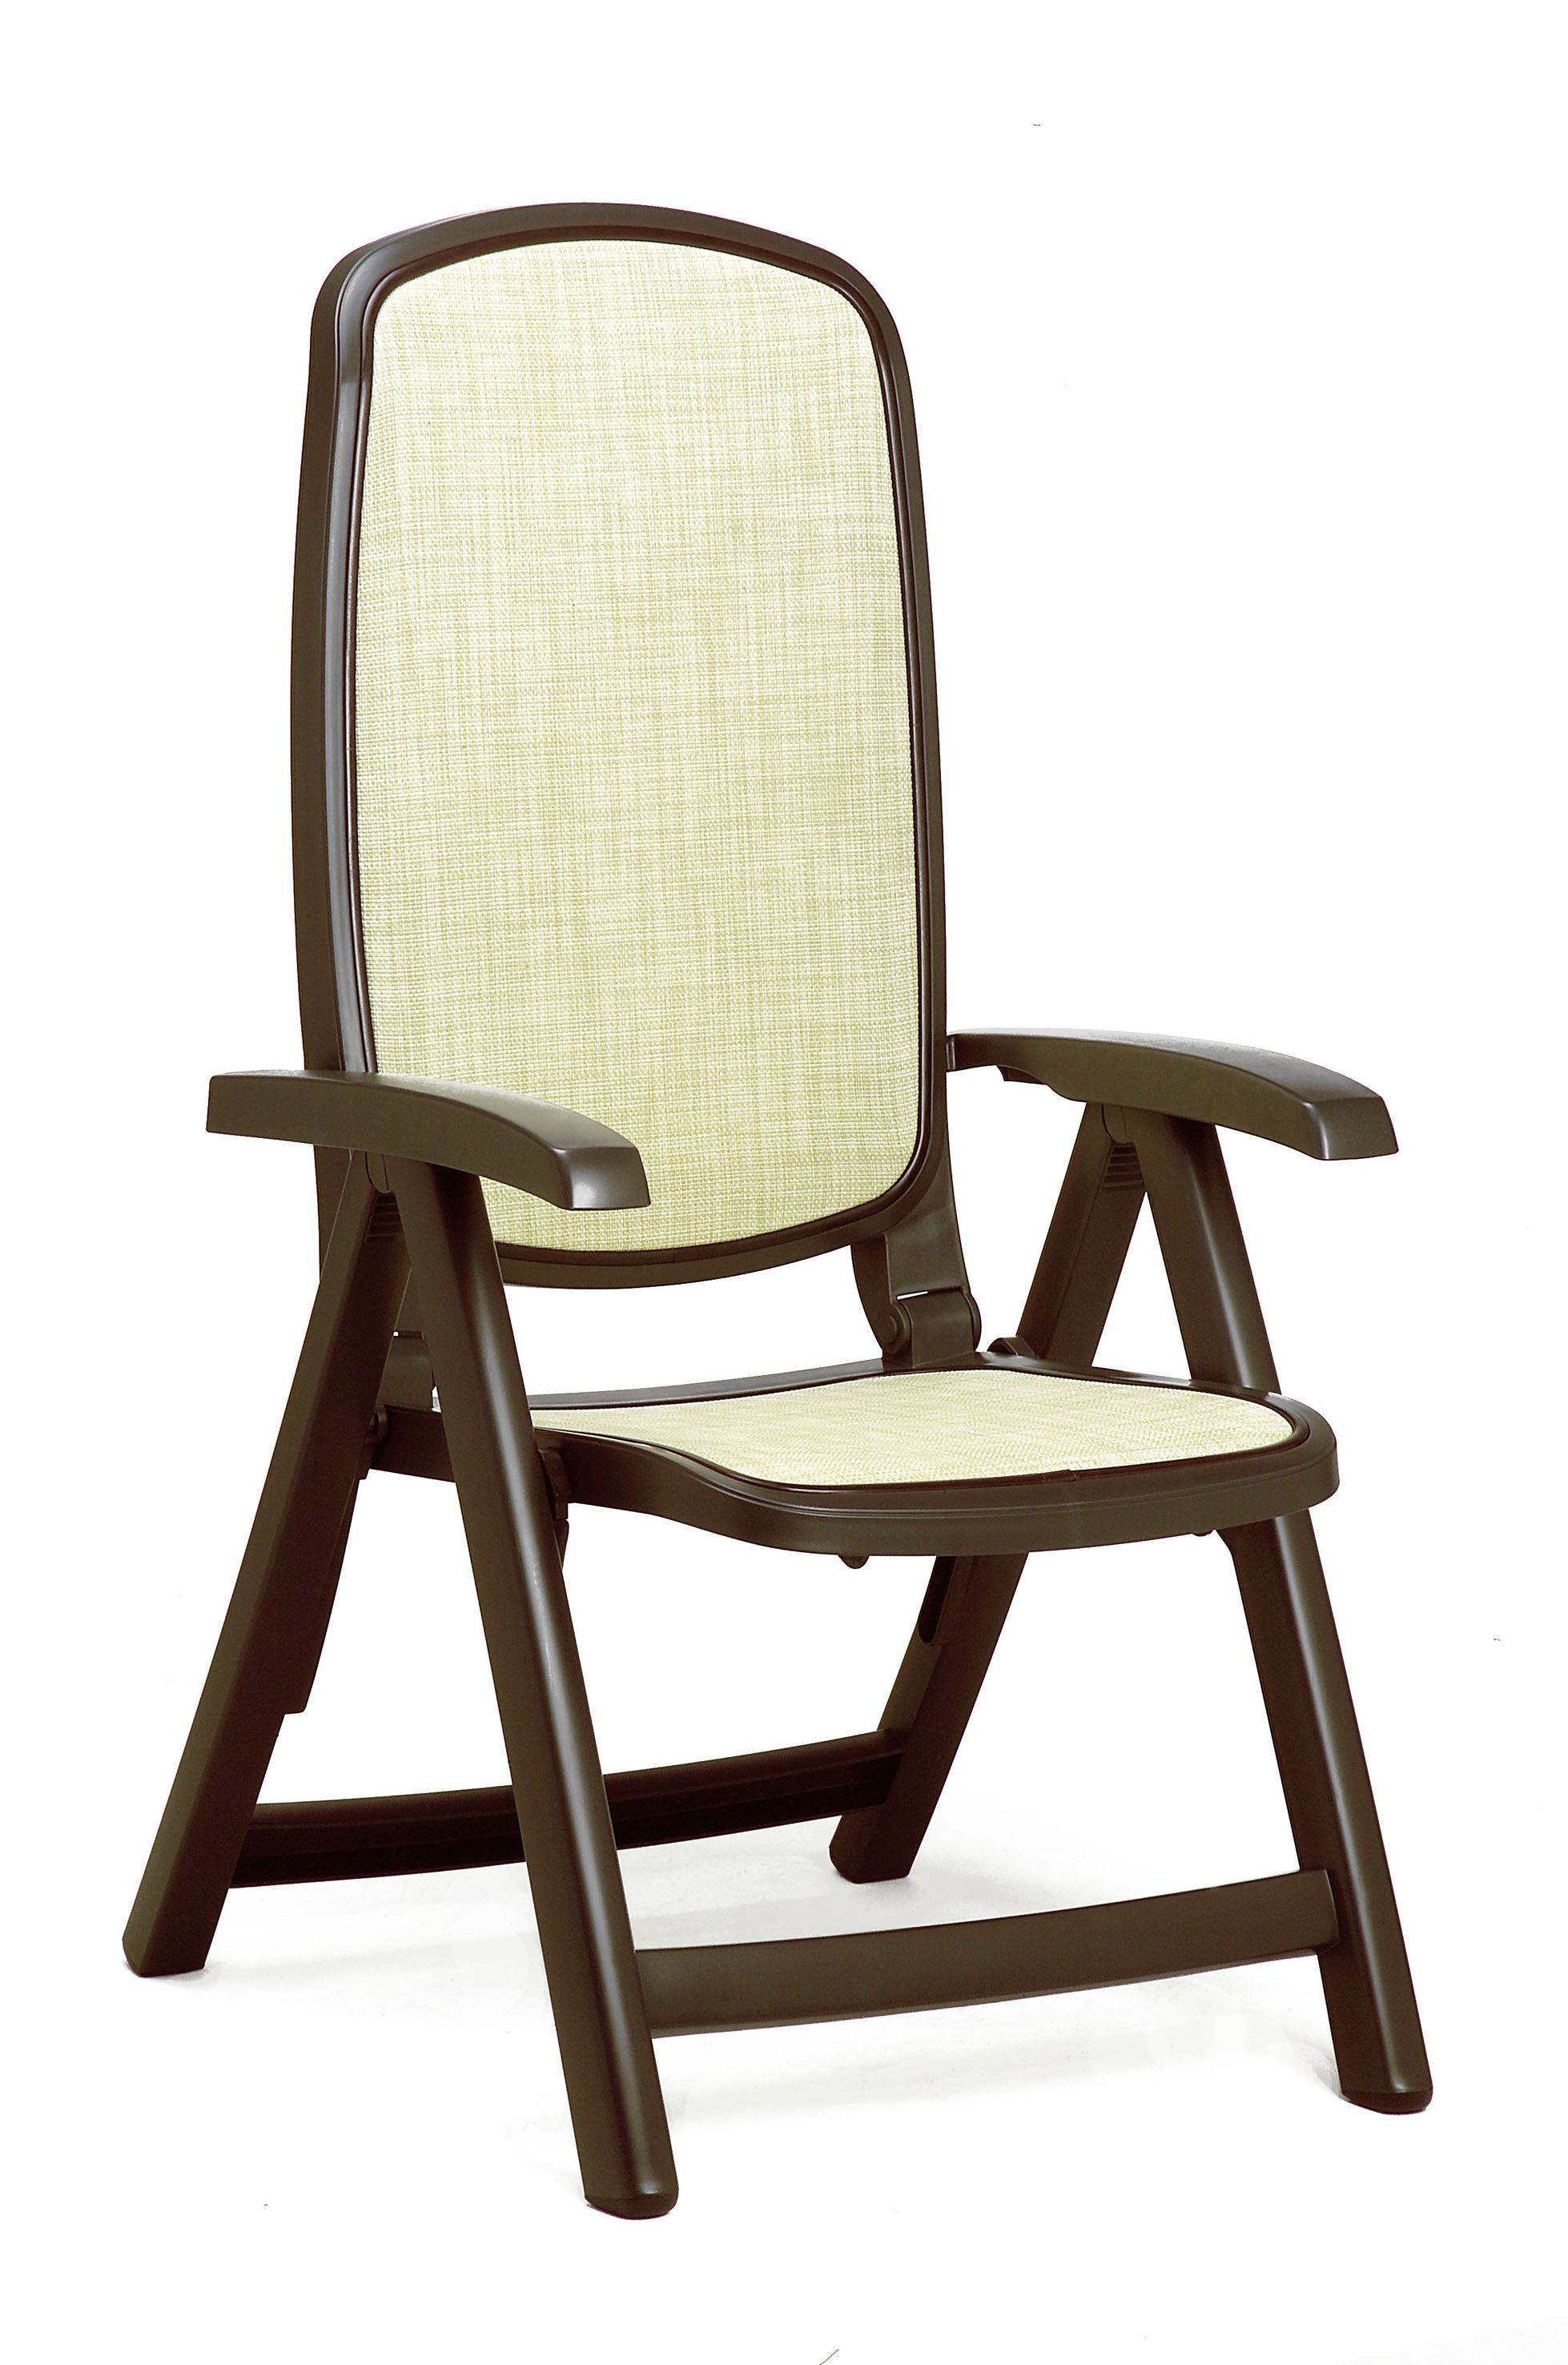 Best ideas about Patio Furniture Chairs
. Save or Pin Nardi Delta Resin Sling 5 Position Folding Patio Chair Now.